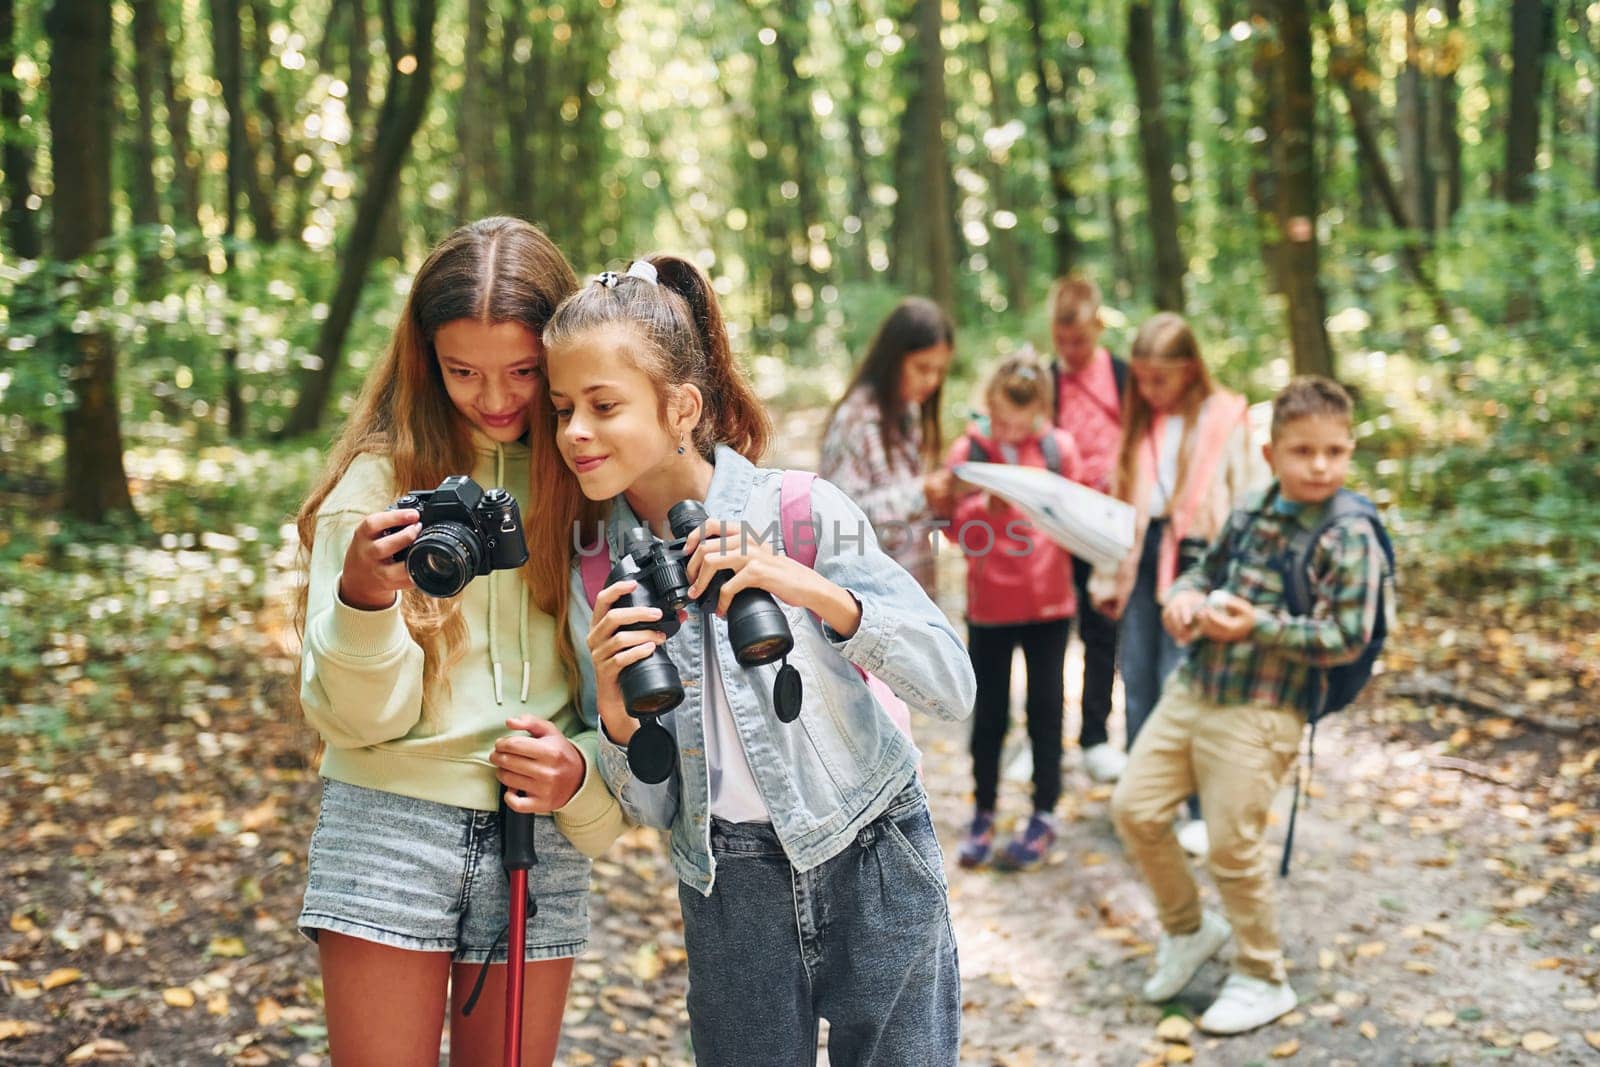 Conception of tourism. Kids in green forest at summer daytime together by Standret